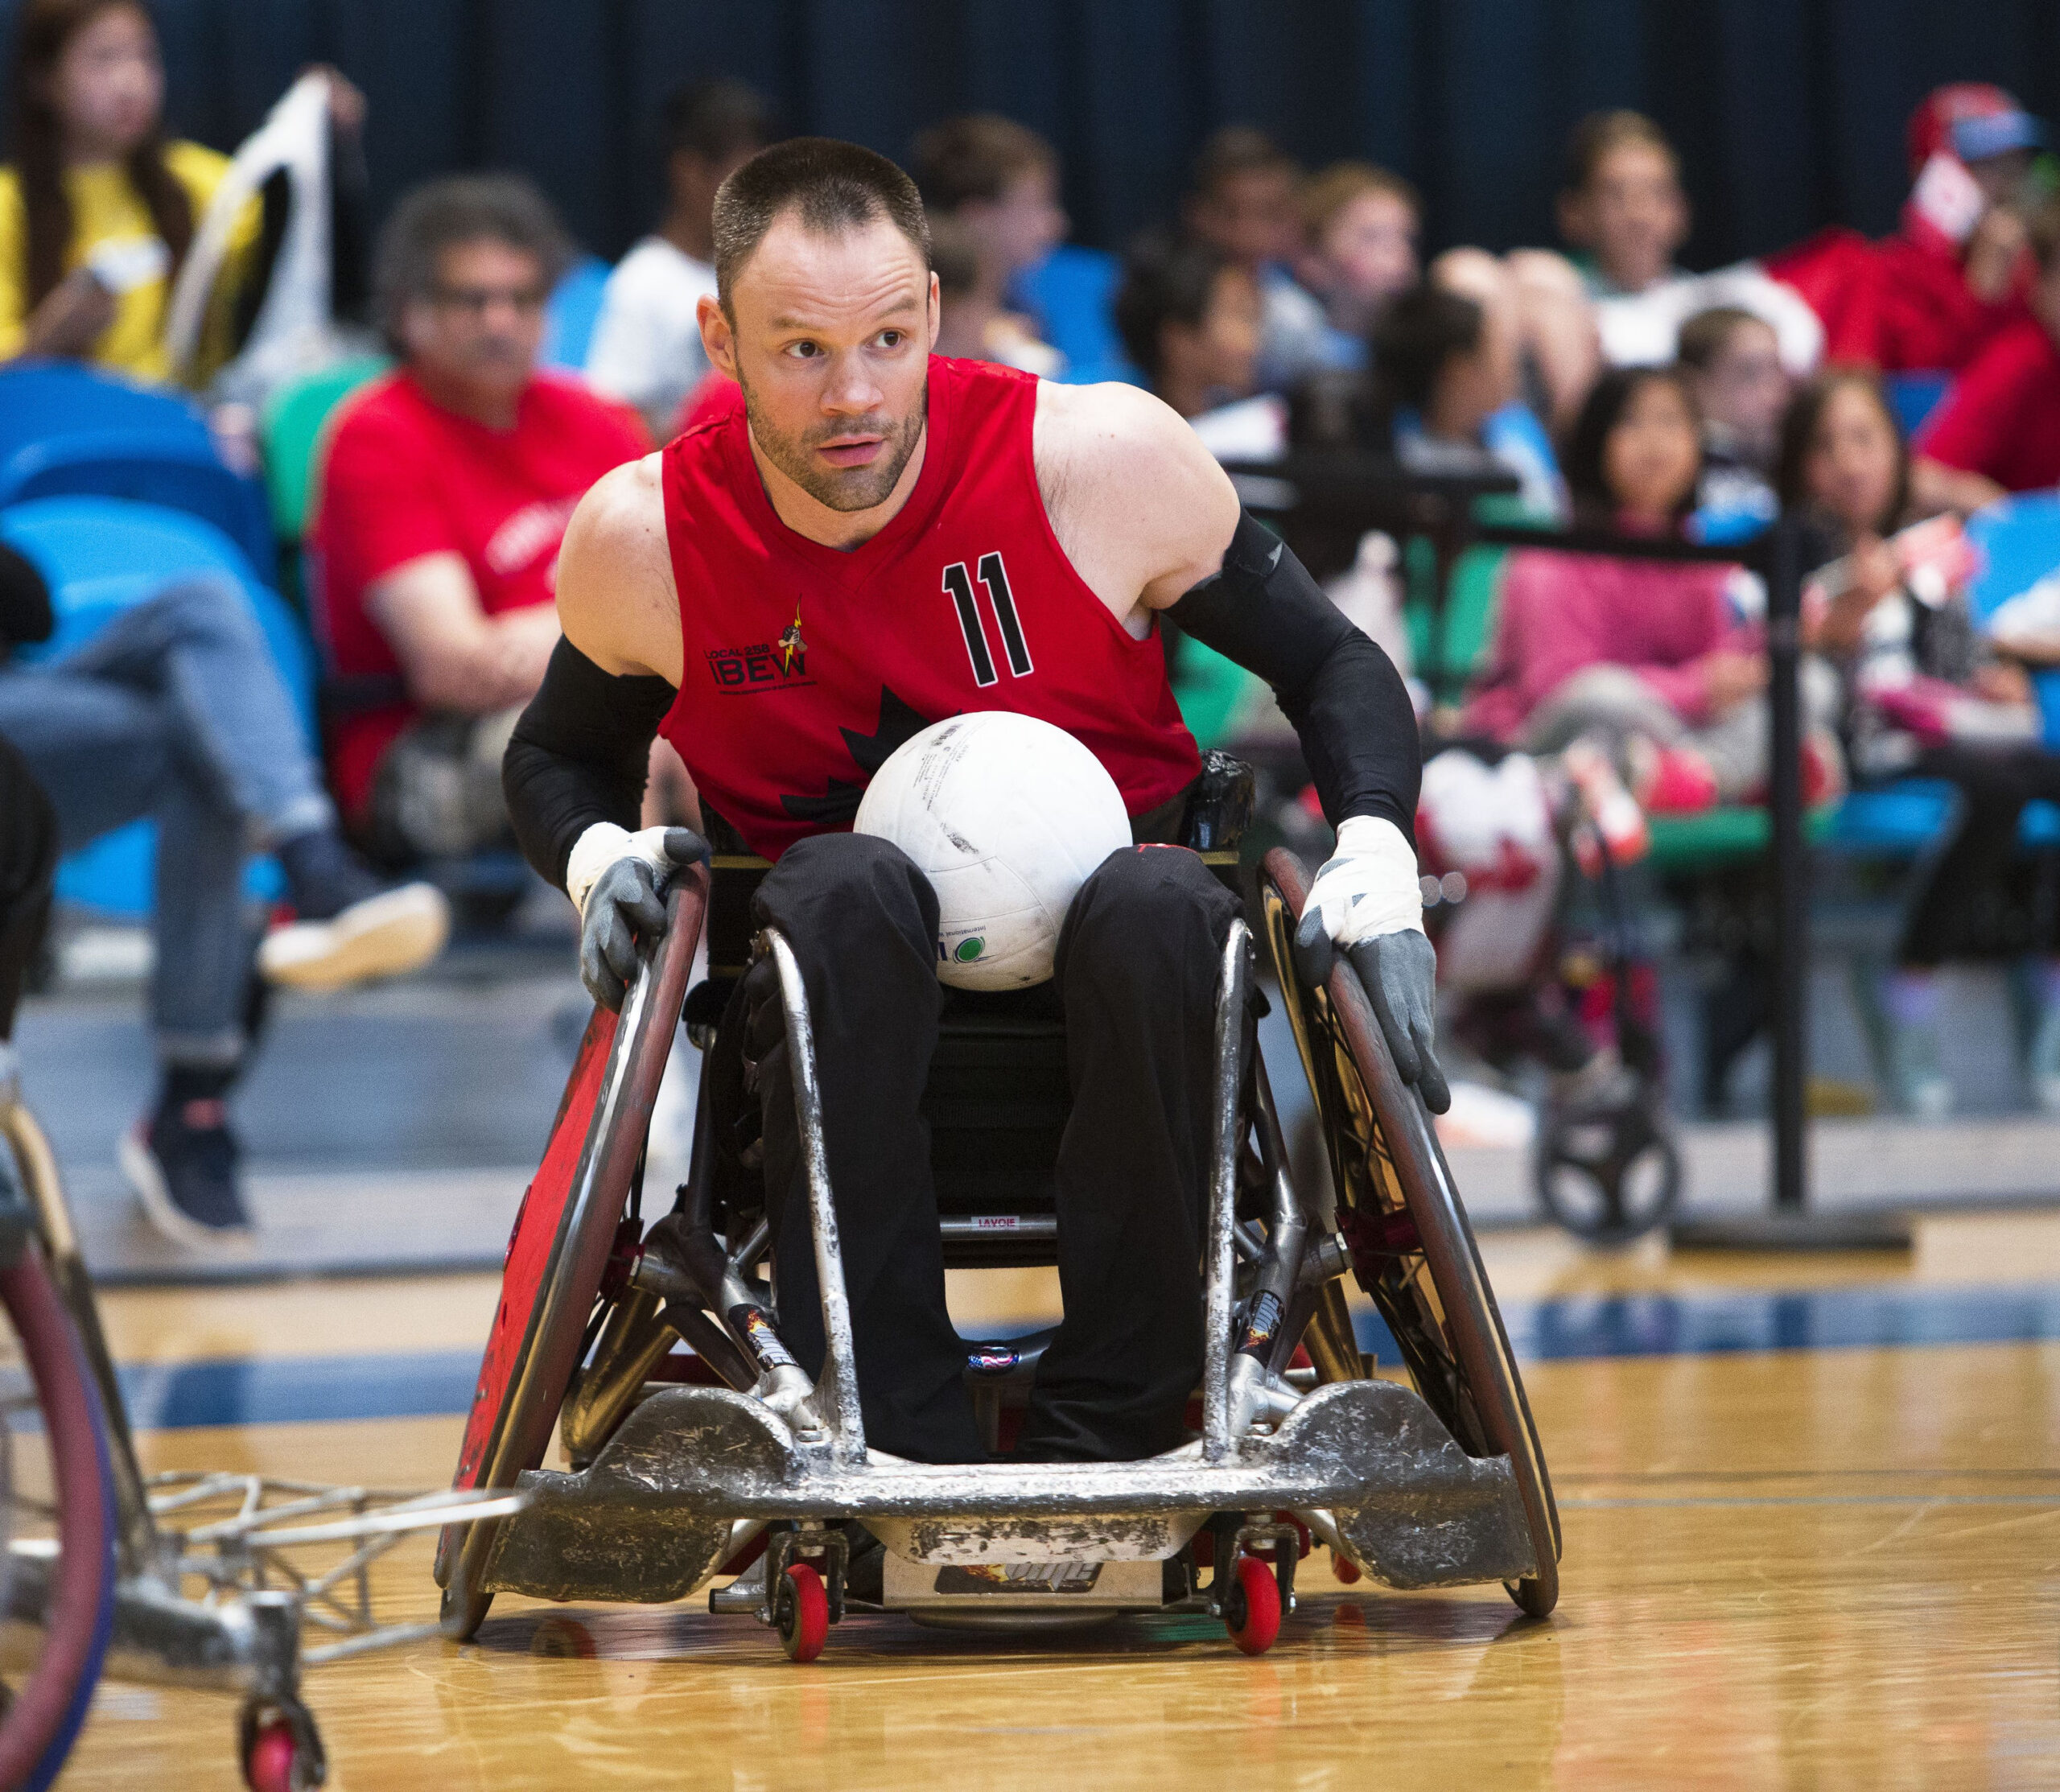 A wheelchair rugby player, Fabien Lavoie, holding a ball while seated in his wheelchair.